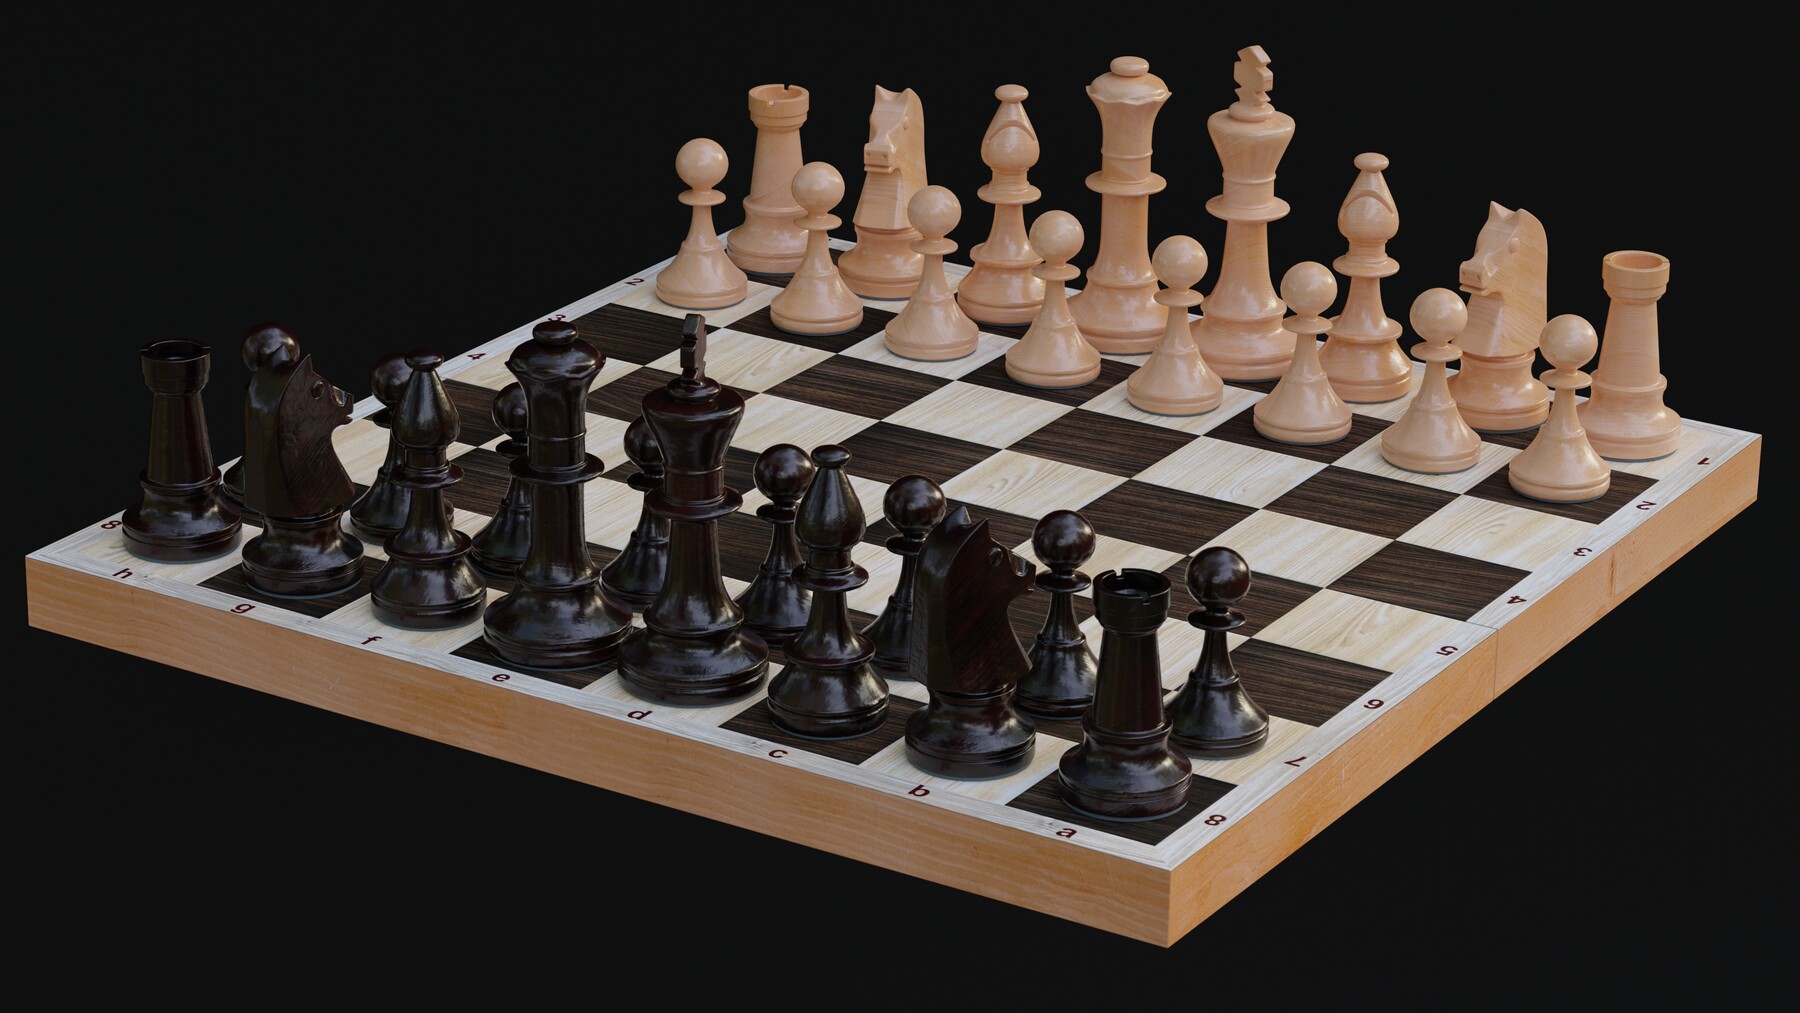 Chess board and figures